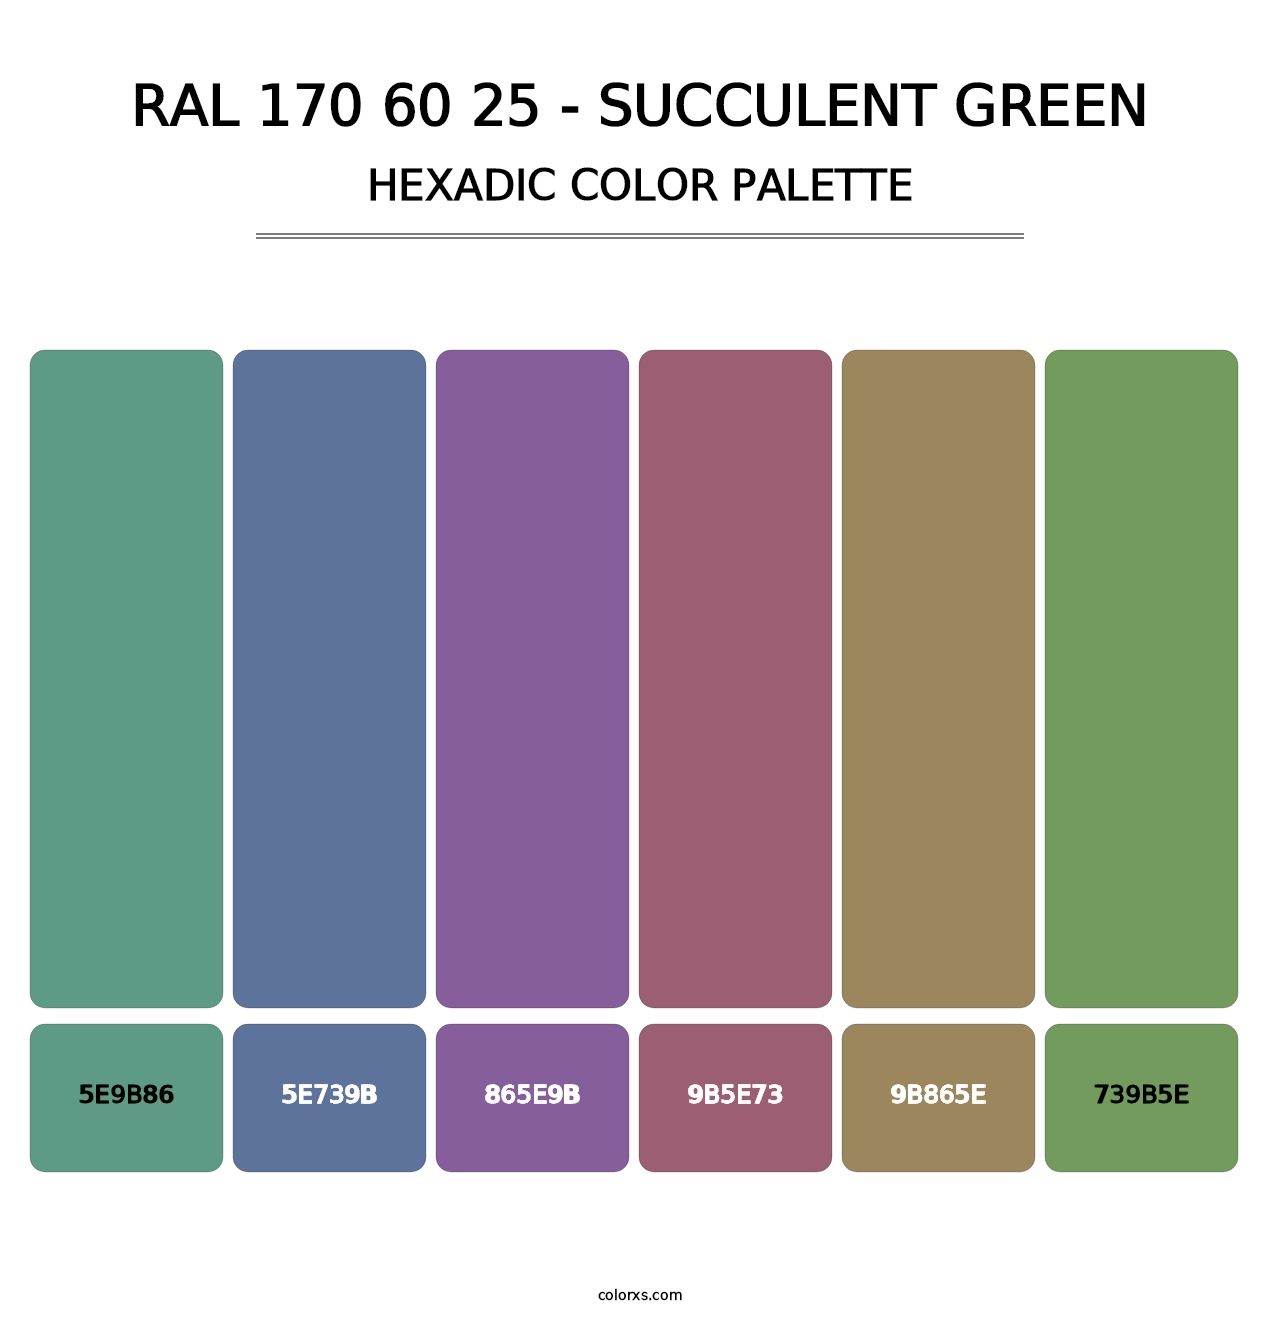 RAL 170 60 25 - Succulent Green - Hexadic Color Palette